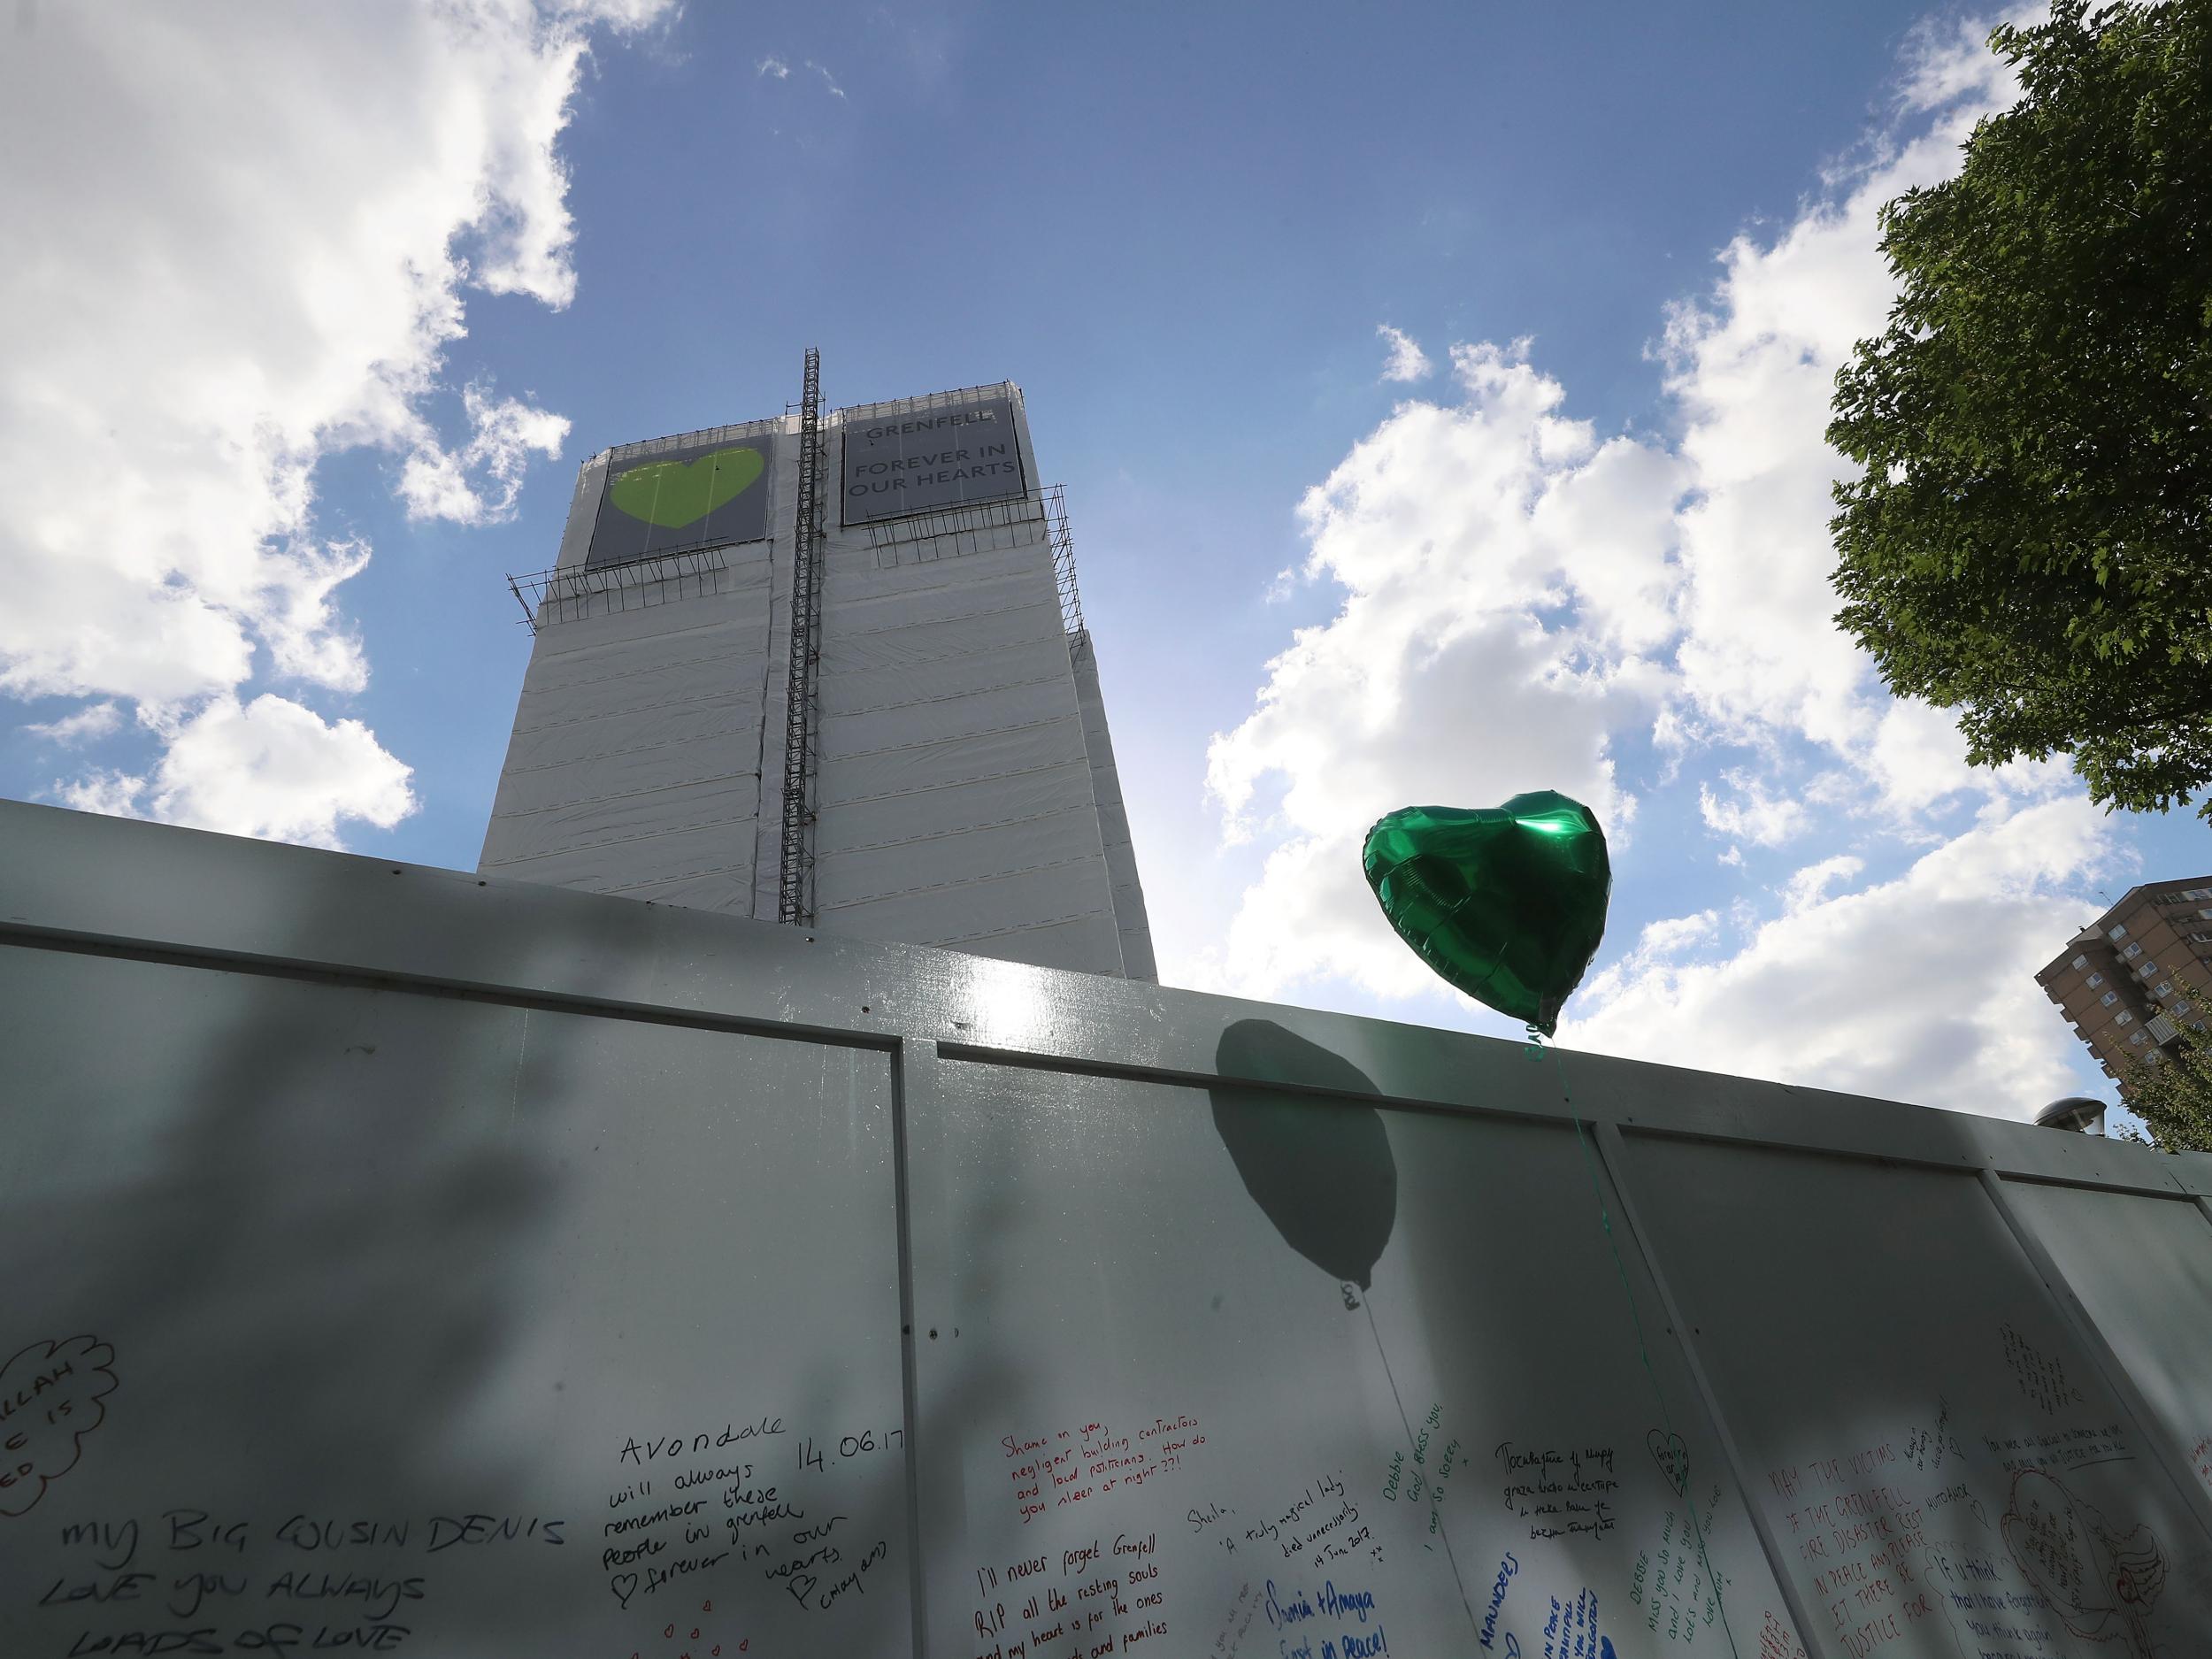 The tower's blackened shell has been covered with white plastic sheeting and banners featuring green heart since the one-year anniversary of the tragedy